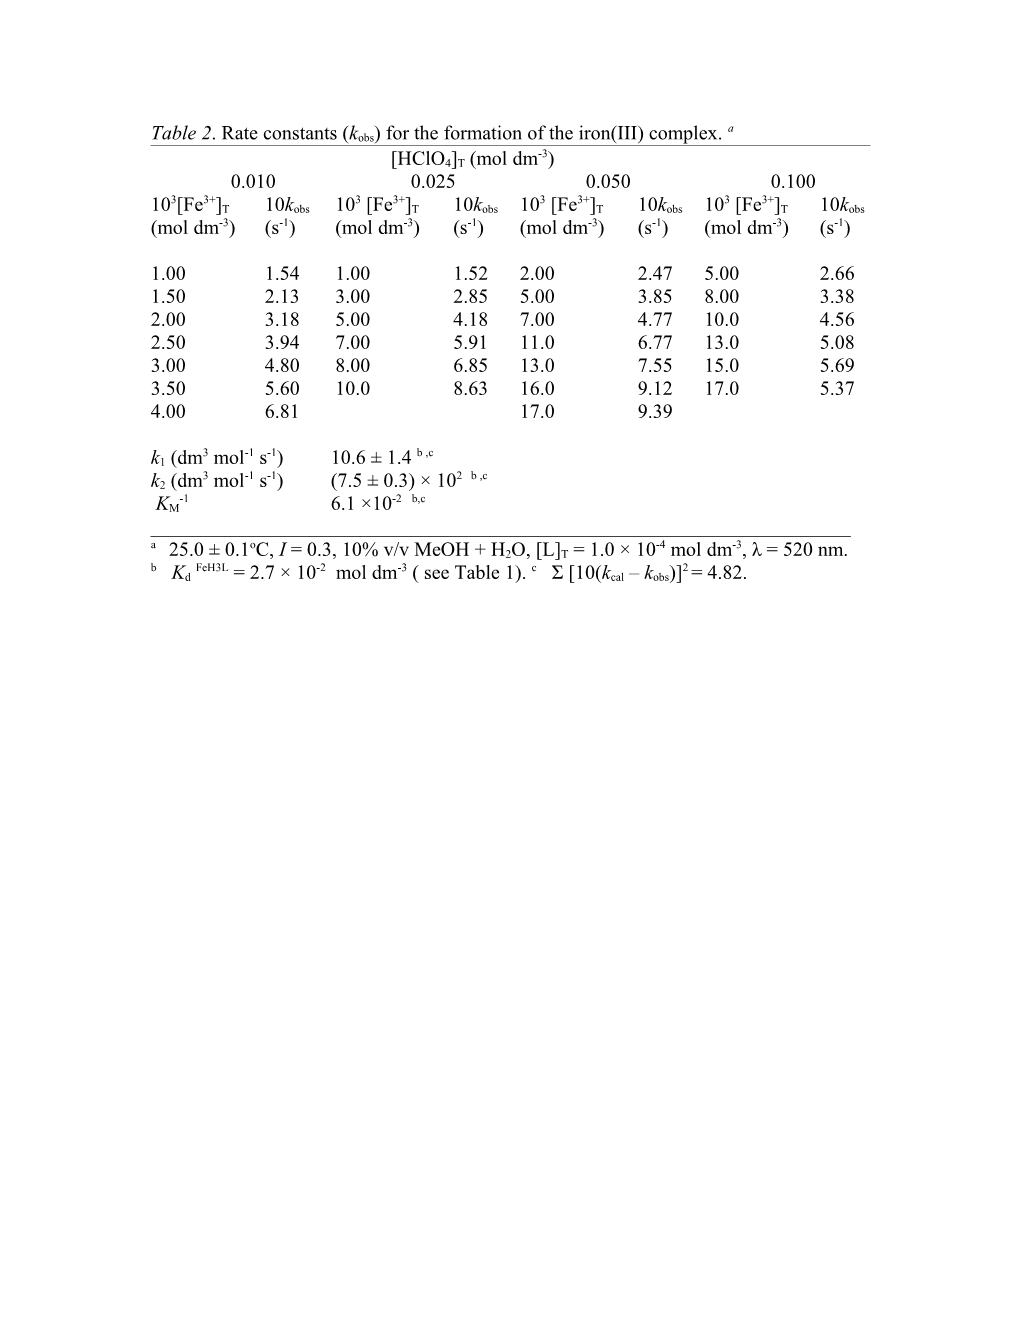 Table2. Rate Constants (Kobs) for the Formation of the Iron(III) Complex. A